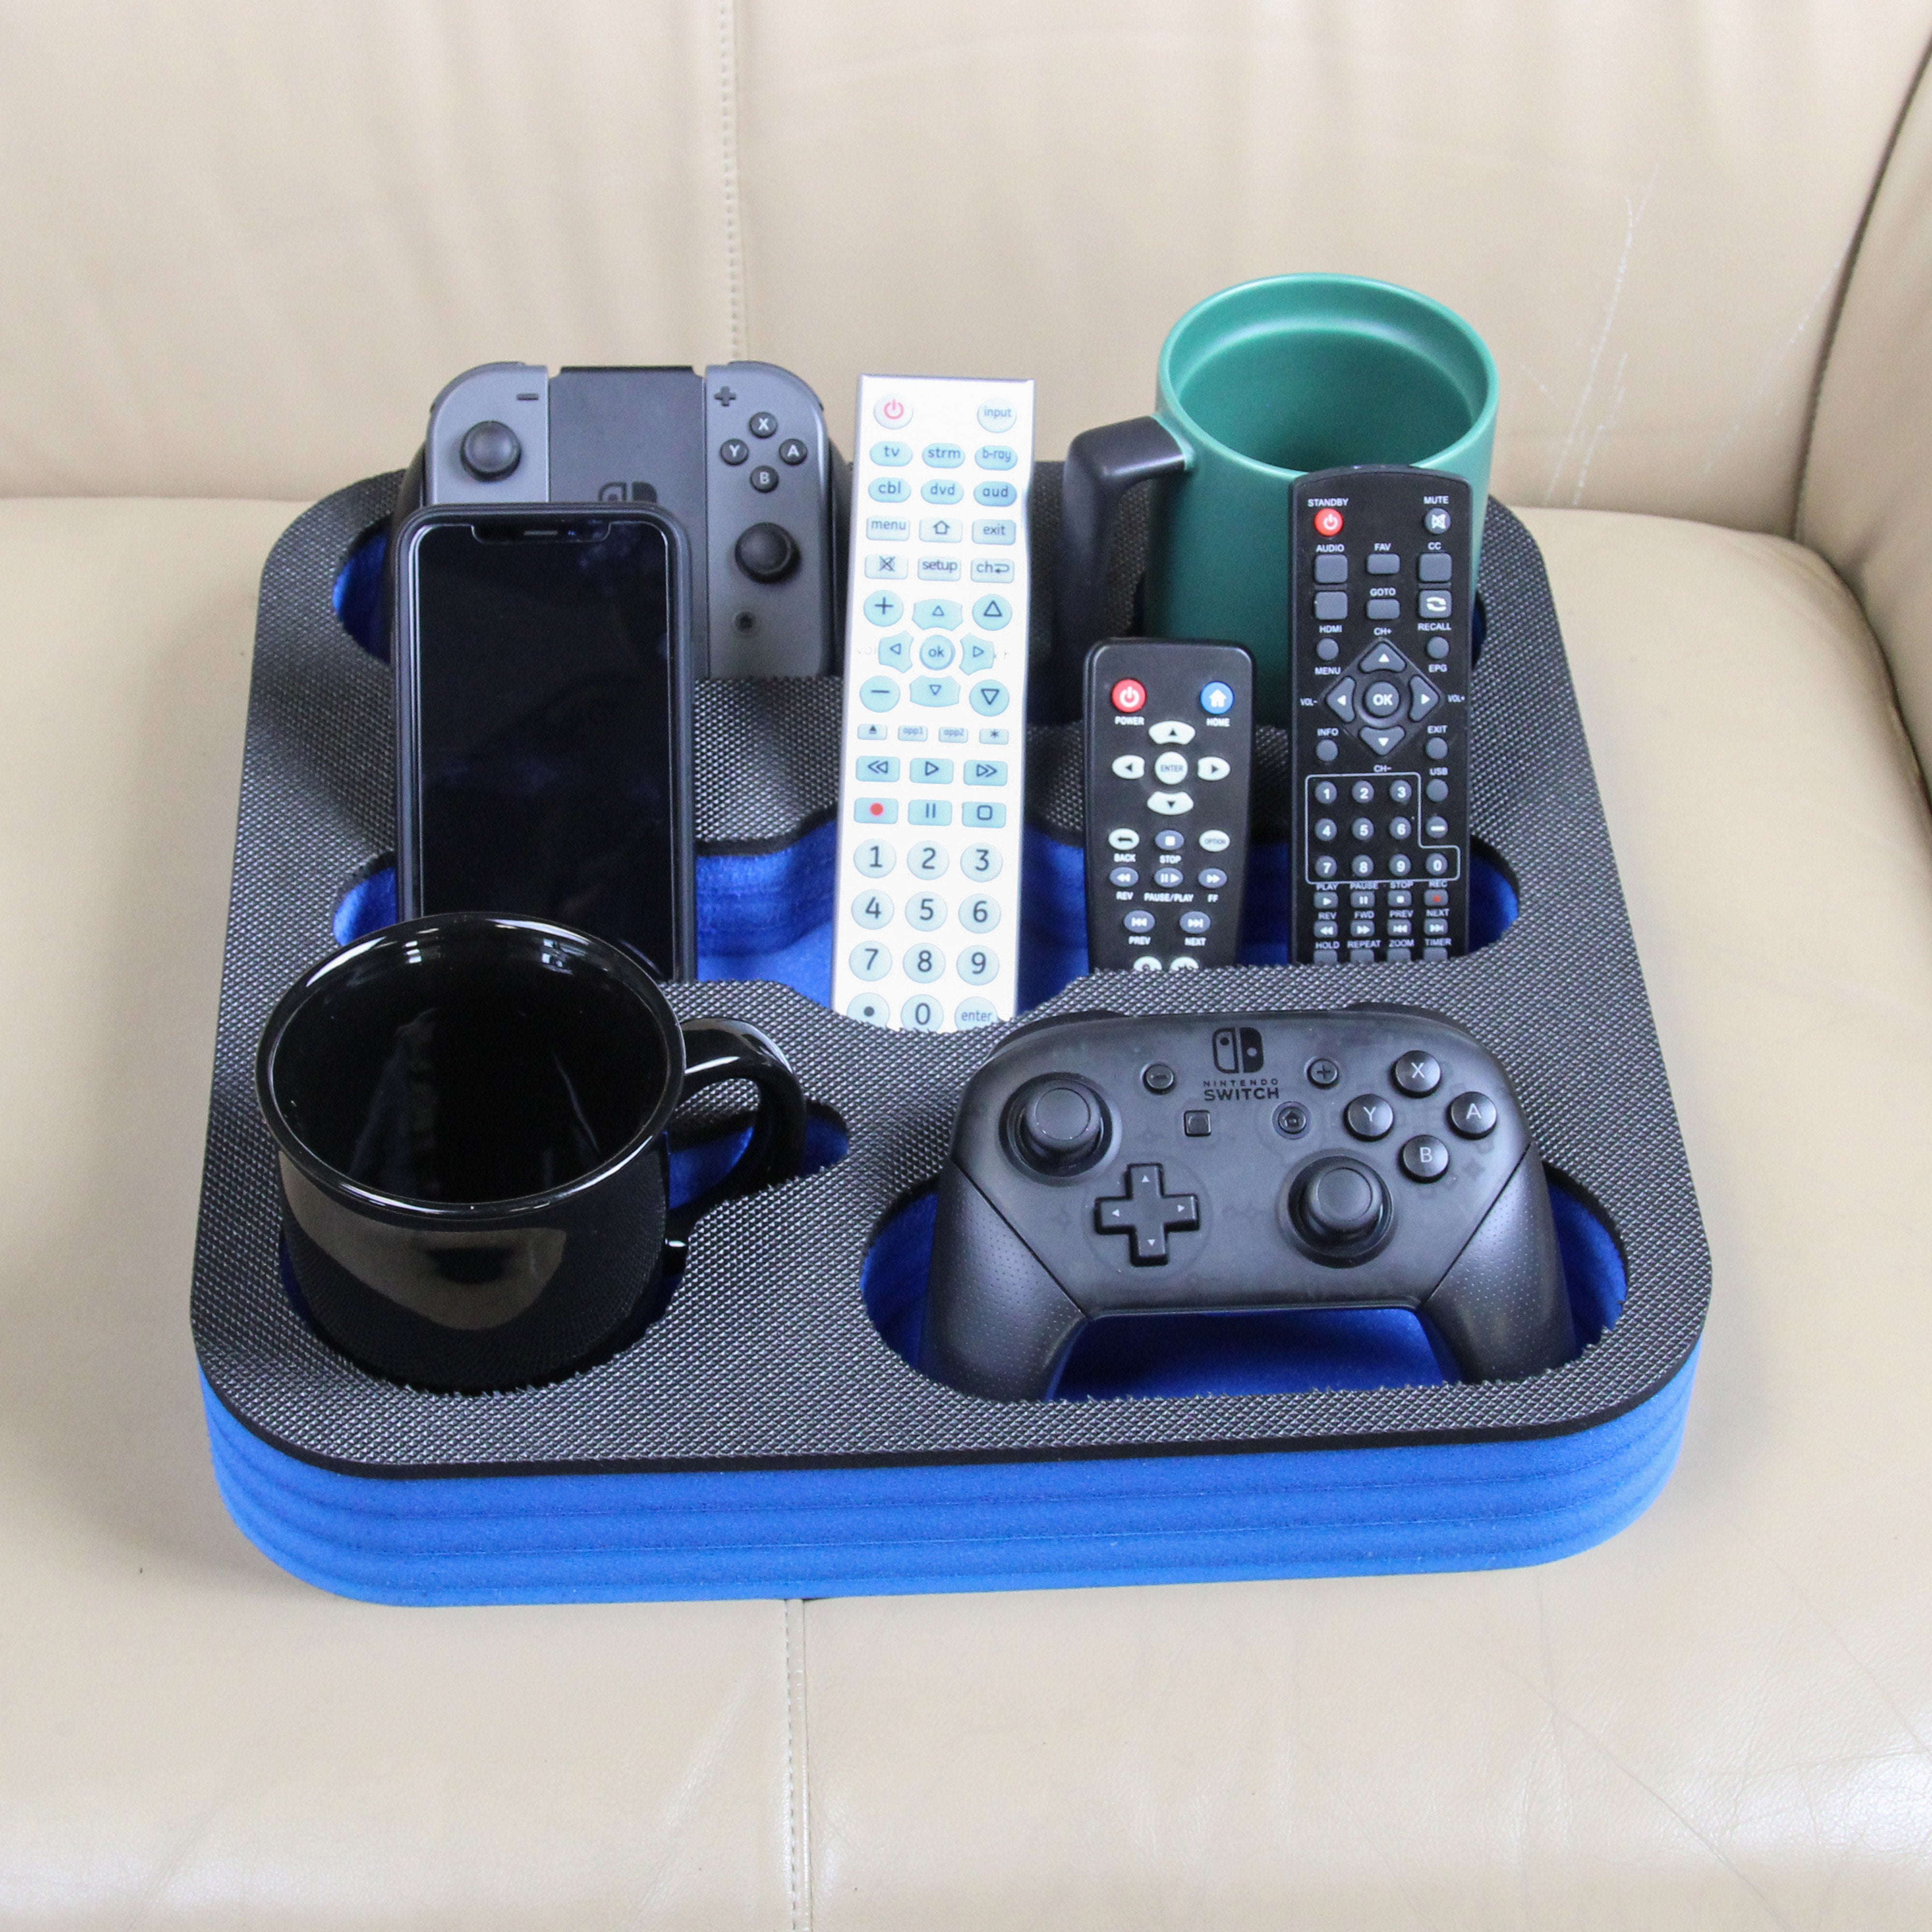 Couch Drink Holder Refreshment Tray for Sofa Bed Floor Car RV Lounge TV Room Durable Foam 5 Compartments 2 Game Controller Slots 13.75 Inches Wide